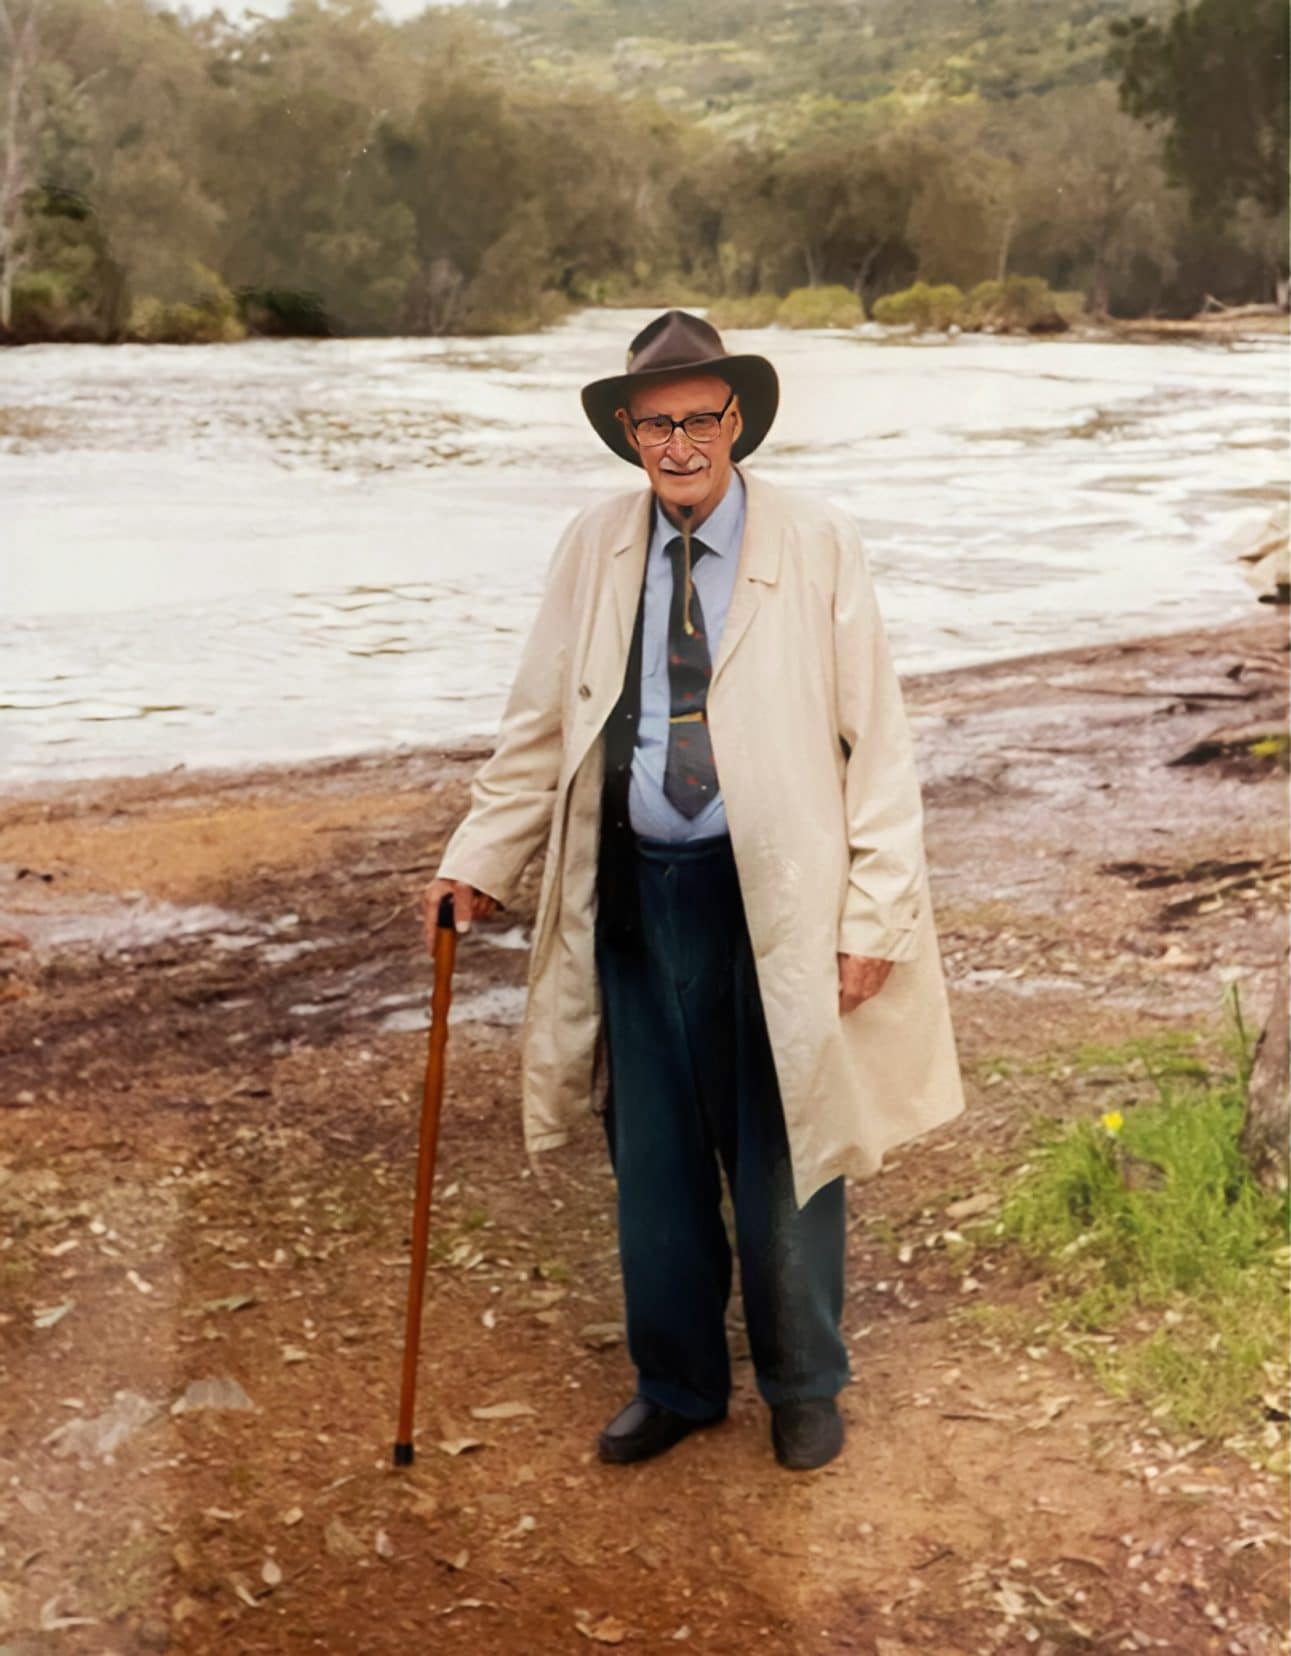 my grandad stood by a river with trees in the back ground in WA. He is wearing a shirt and tie ans raincaot and holding a walking stick 